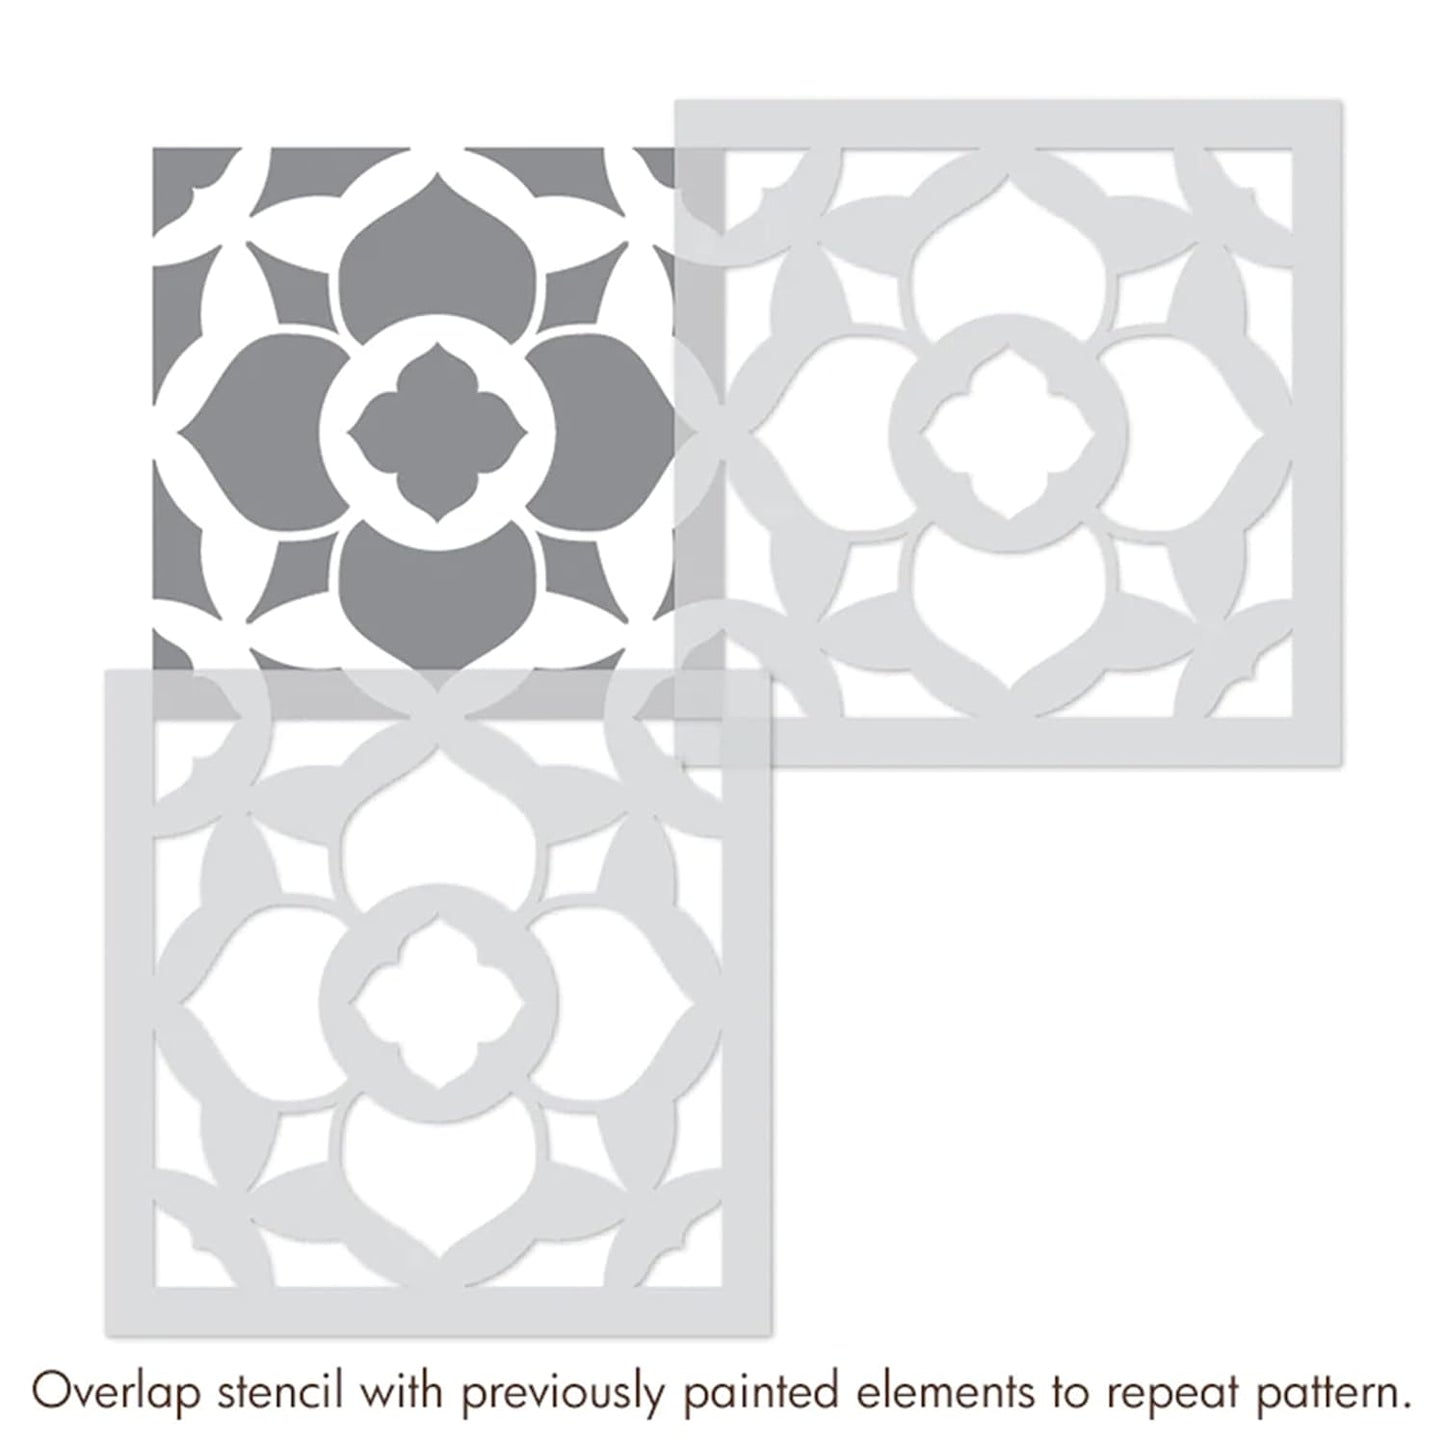 Latest Cathedral Design Stencils for Wall Painting - Pack of 2, Sheet Size 12 x 12 inch/Design for Wall Painting 10 x 10 inch - Small